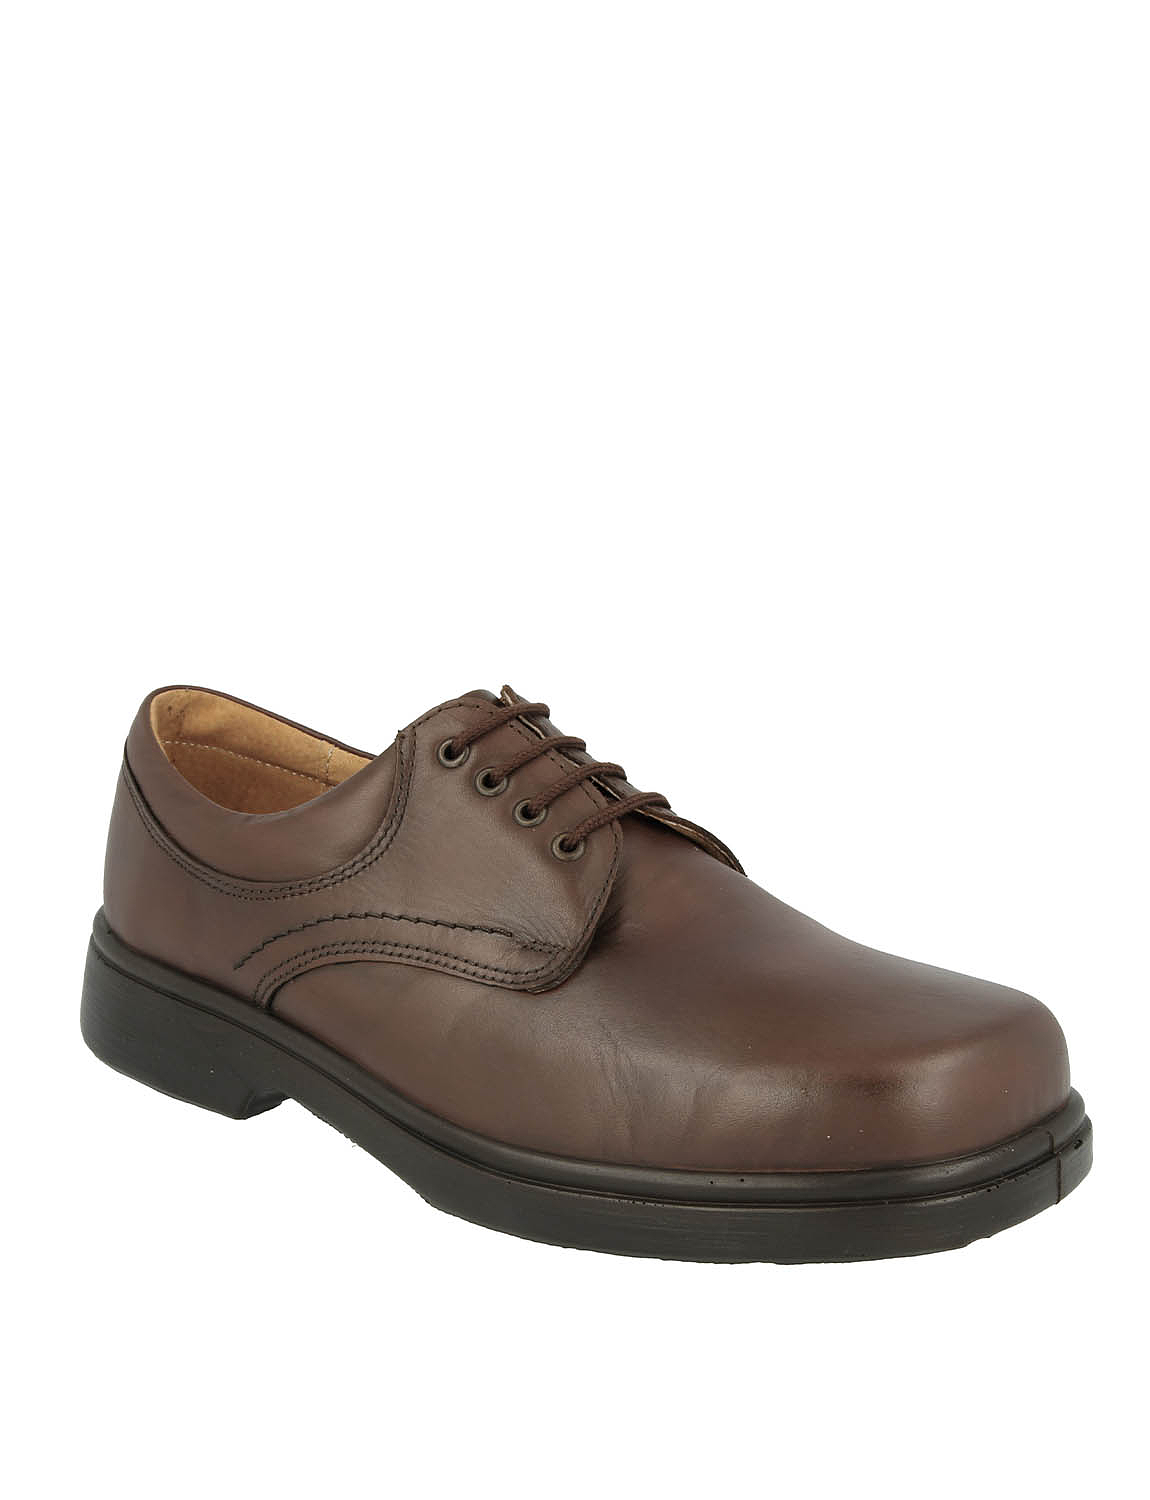 Mens Db Shoes Shannon Leather Extra Wide Ee To 4E Lace Shoe | Chums